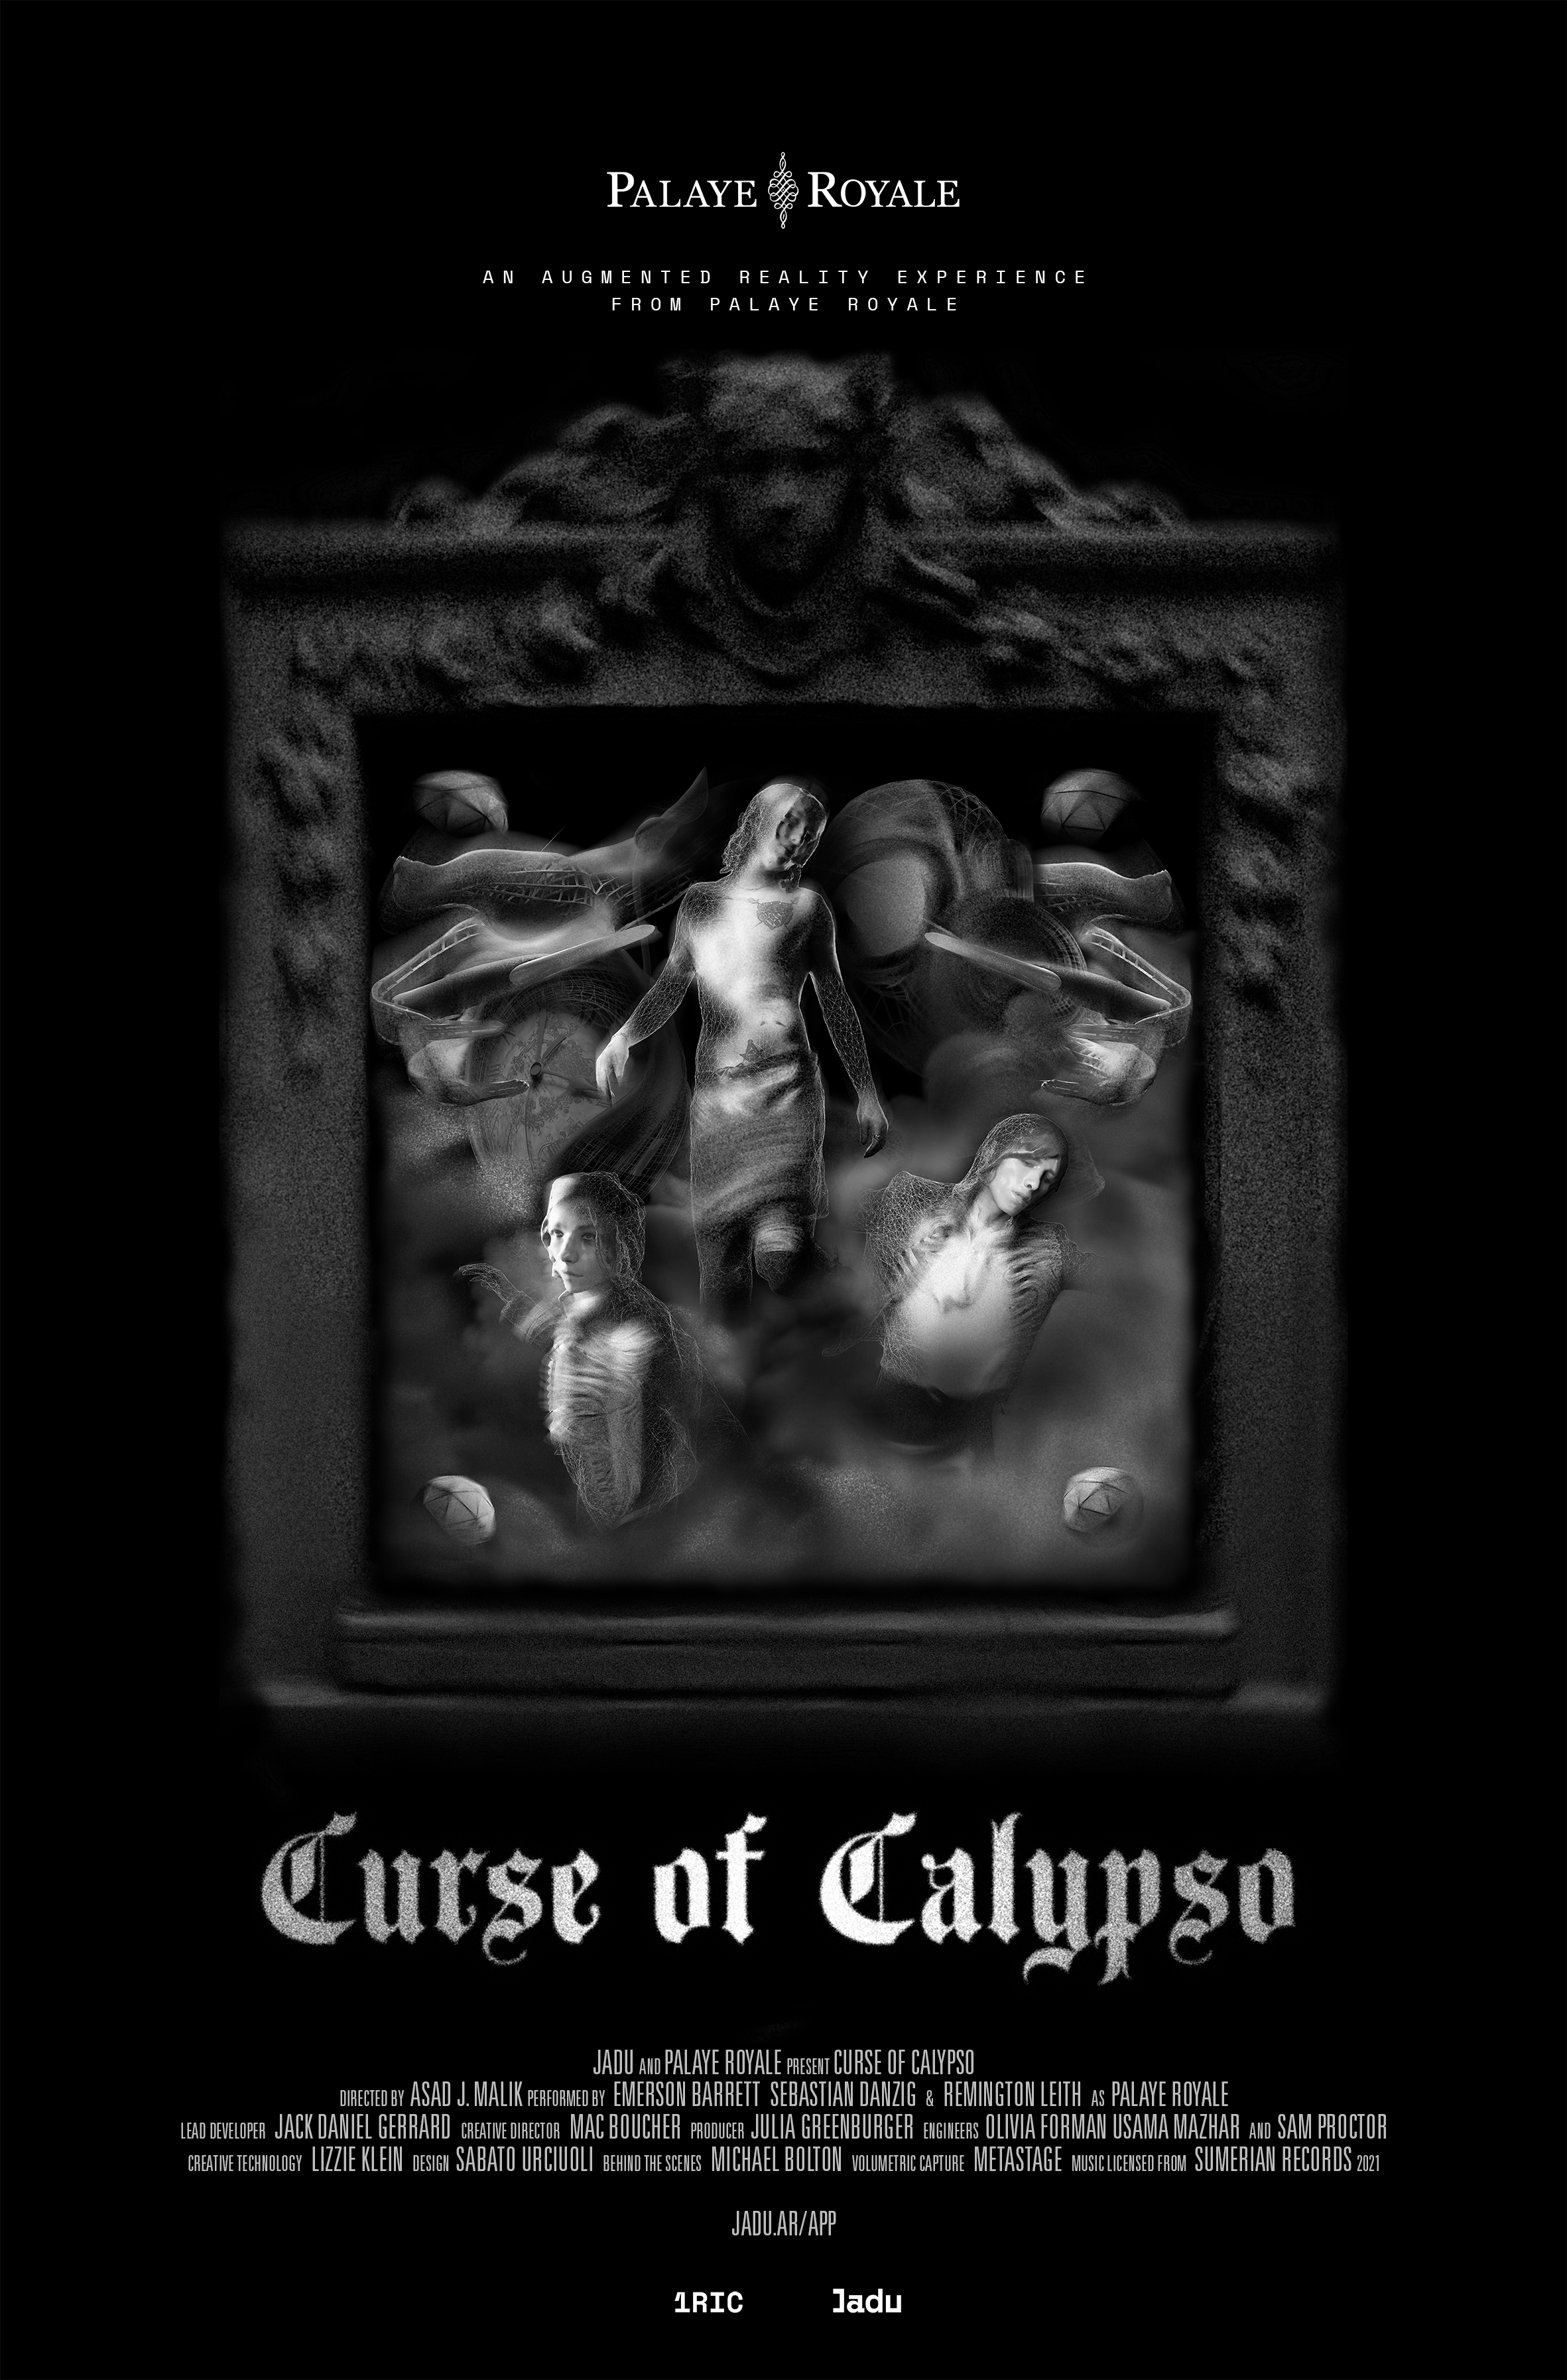 Palaye Royale Announce New Augmented Reality Experience, <i></noscript>Curse of Calypso</i>” title=”Curse_of_Calypso_Poster” data-original-id=”366492″ data-adjusted-id=”366492″ class=”sm_size_full_width sm_alignment_center ” data-image-use=”multiple_use” /></p>
<p>Last summer, Palaye Royale joined SPIN’s Untitled Twitch Stream to chat with fans, play some acoustic tunes, and show off their cooking skills before <a href=